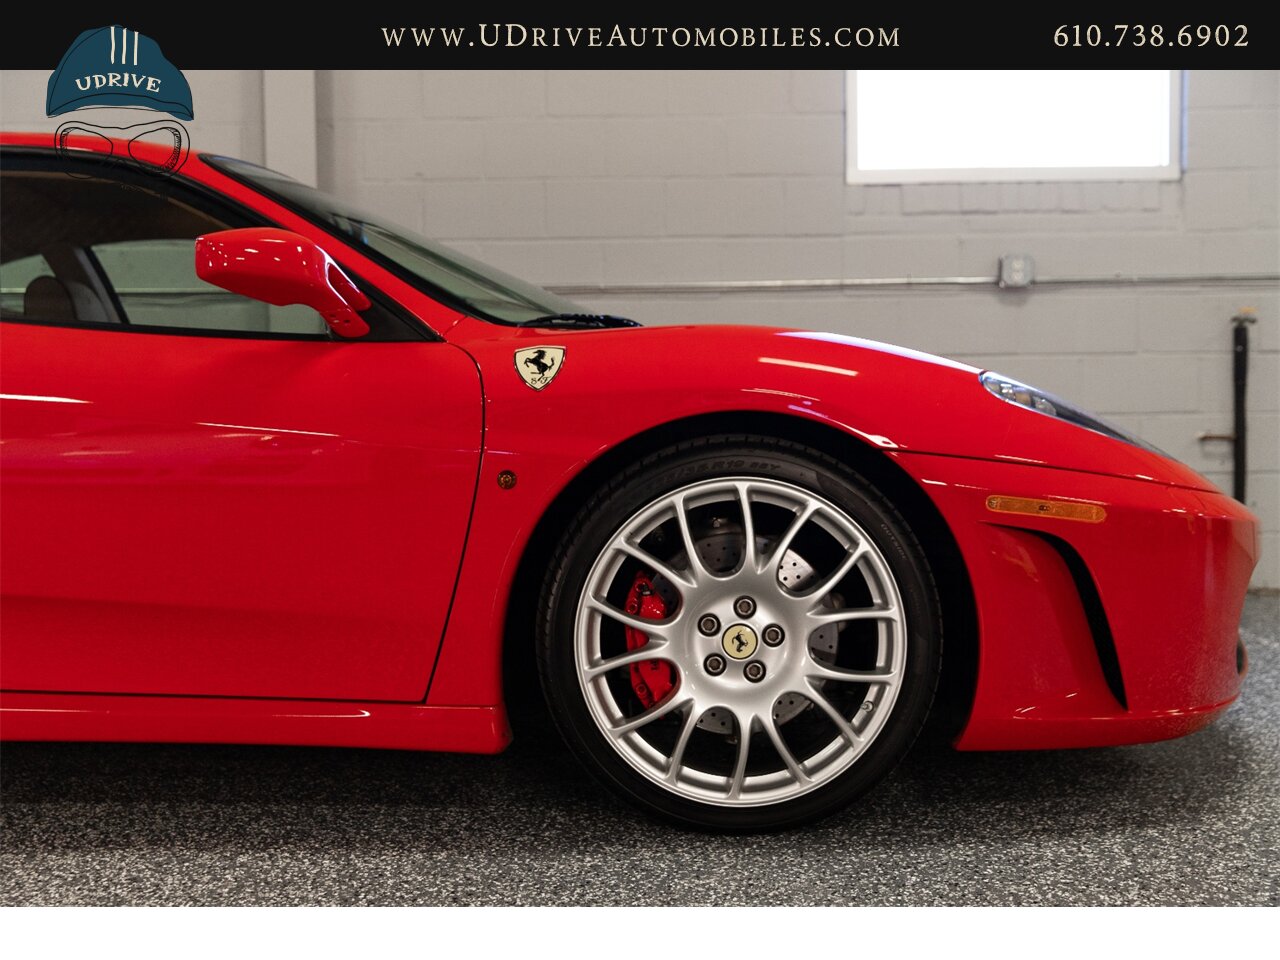 2006 Ferrari F430 F1 Coupe 1 Owner Daytona Seats Challenge Whls  Carbon Fibre Upper Lower Zone Shields Piping Serv Hist $208k MSRP - Photo 13 - West Chester, PA 19382